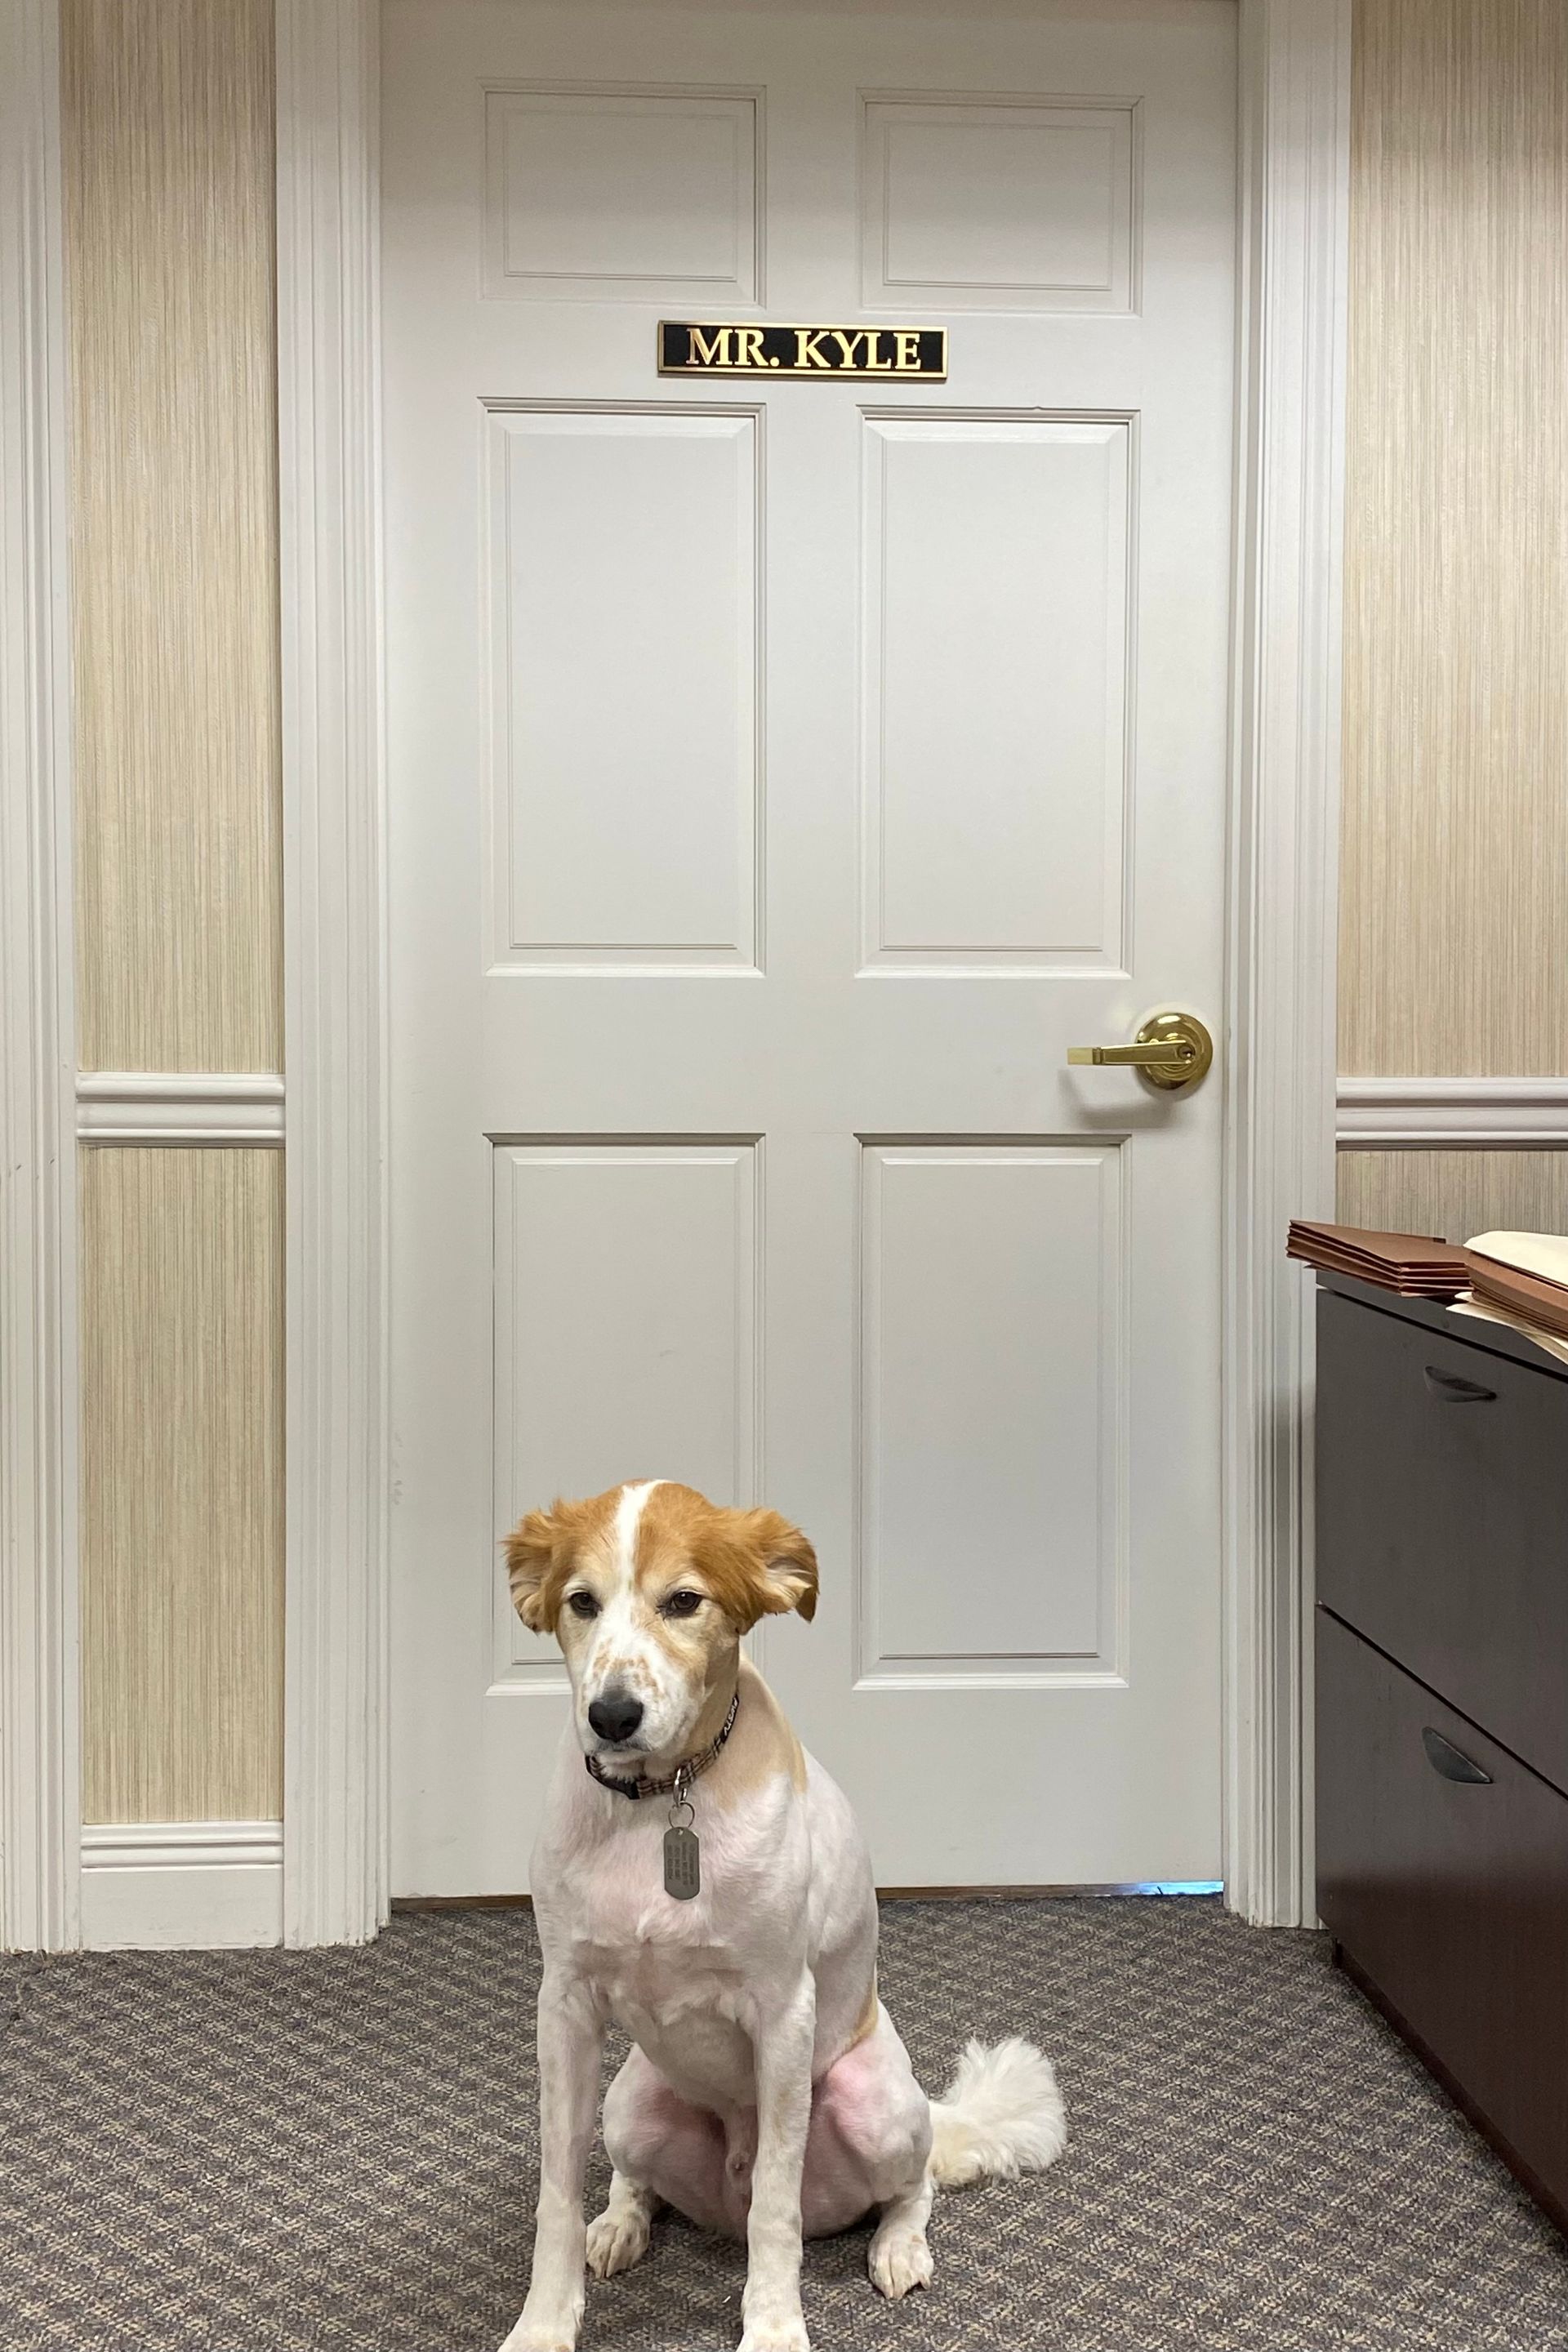 A brown and white dog is sitting in front of a door.